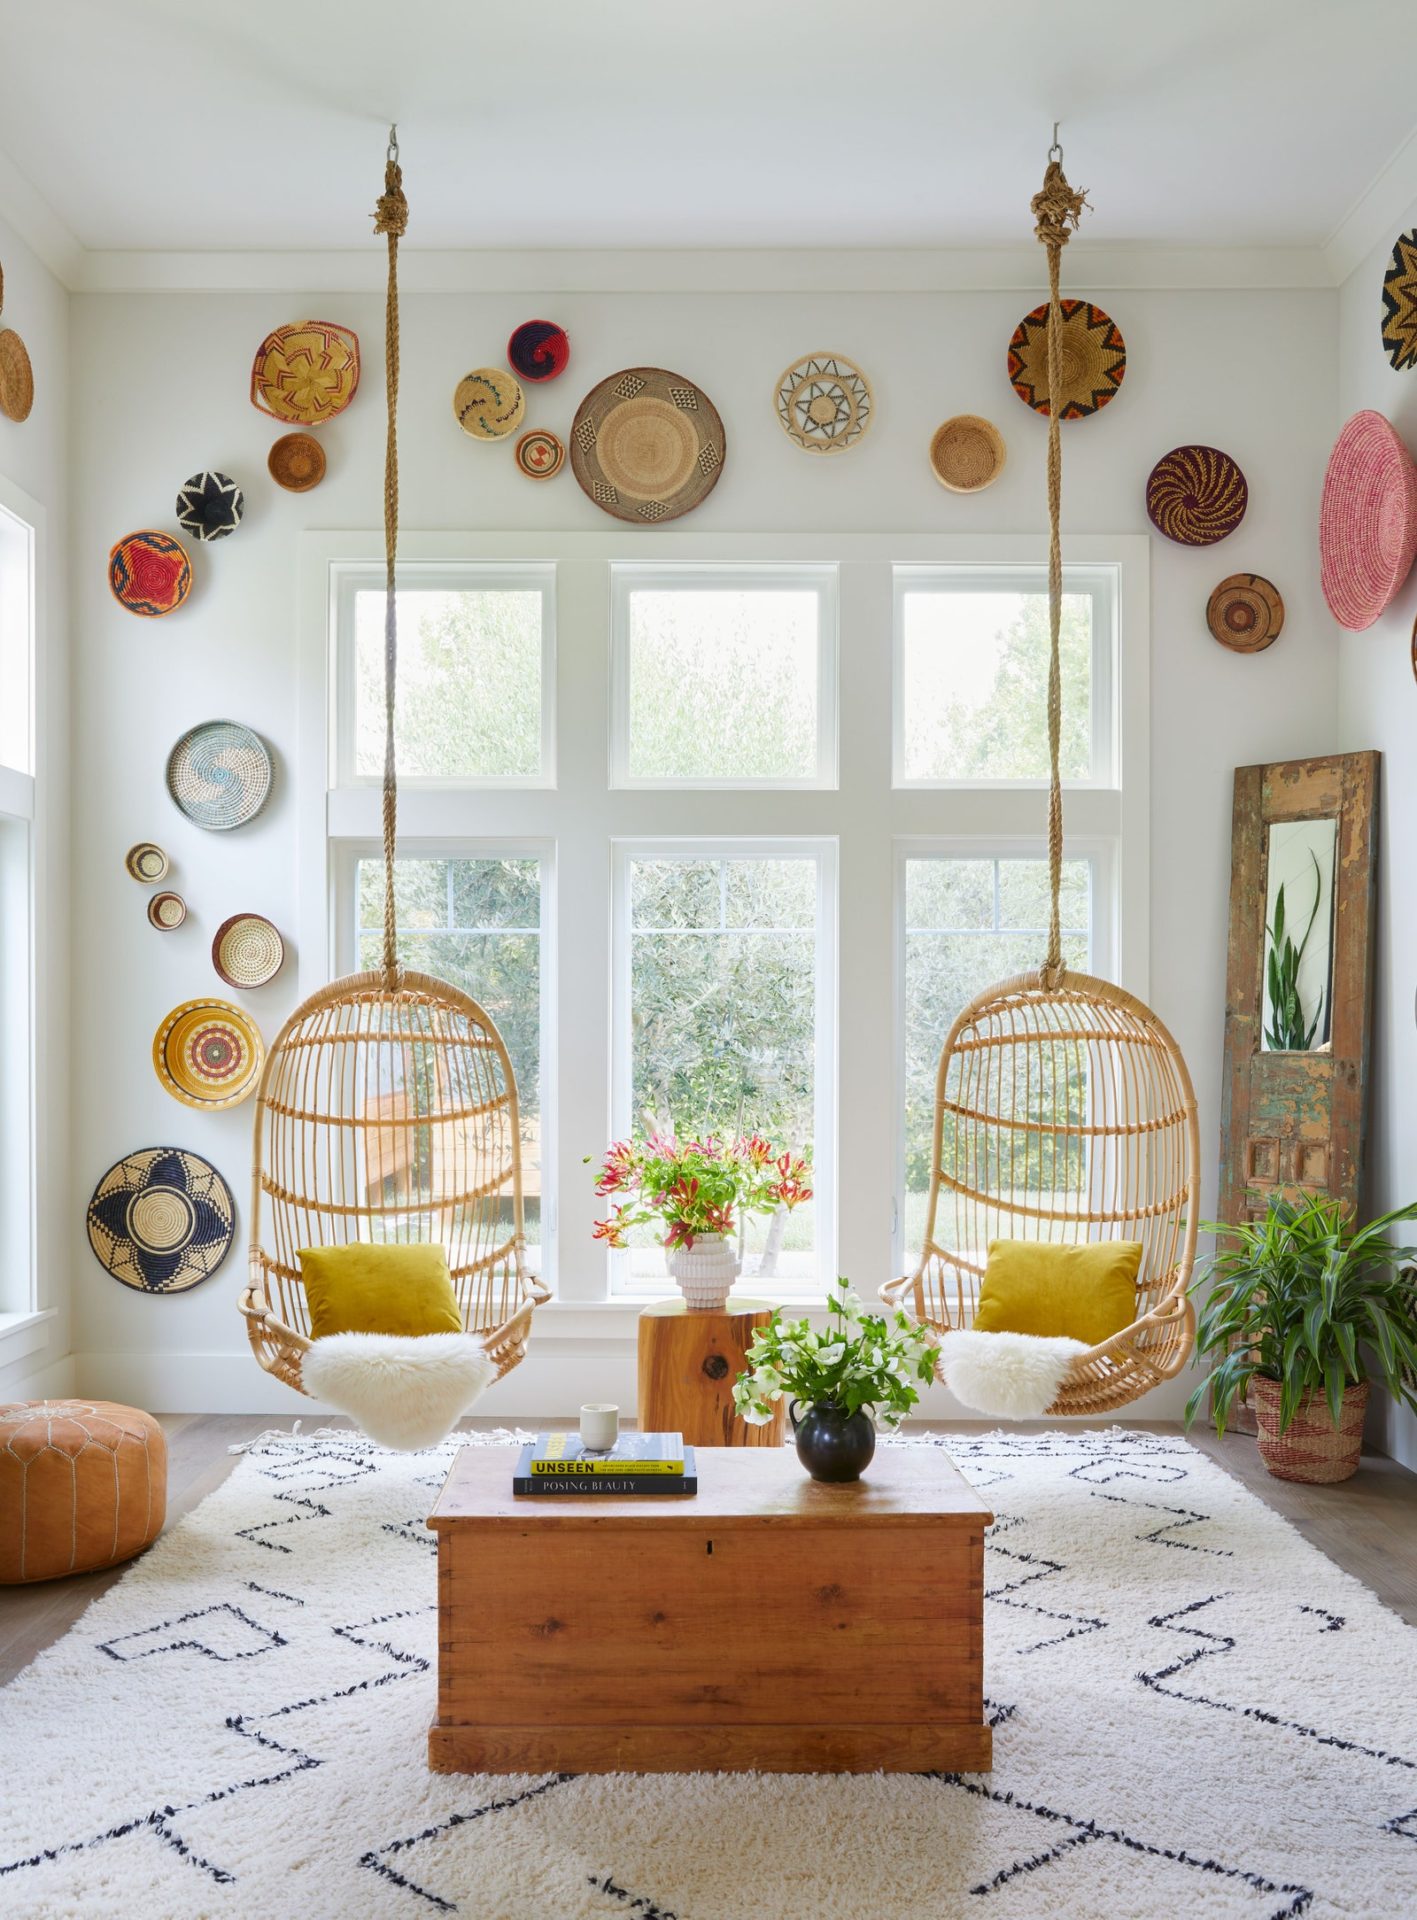 Decor With Dishes On The Wall